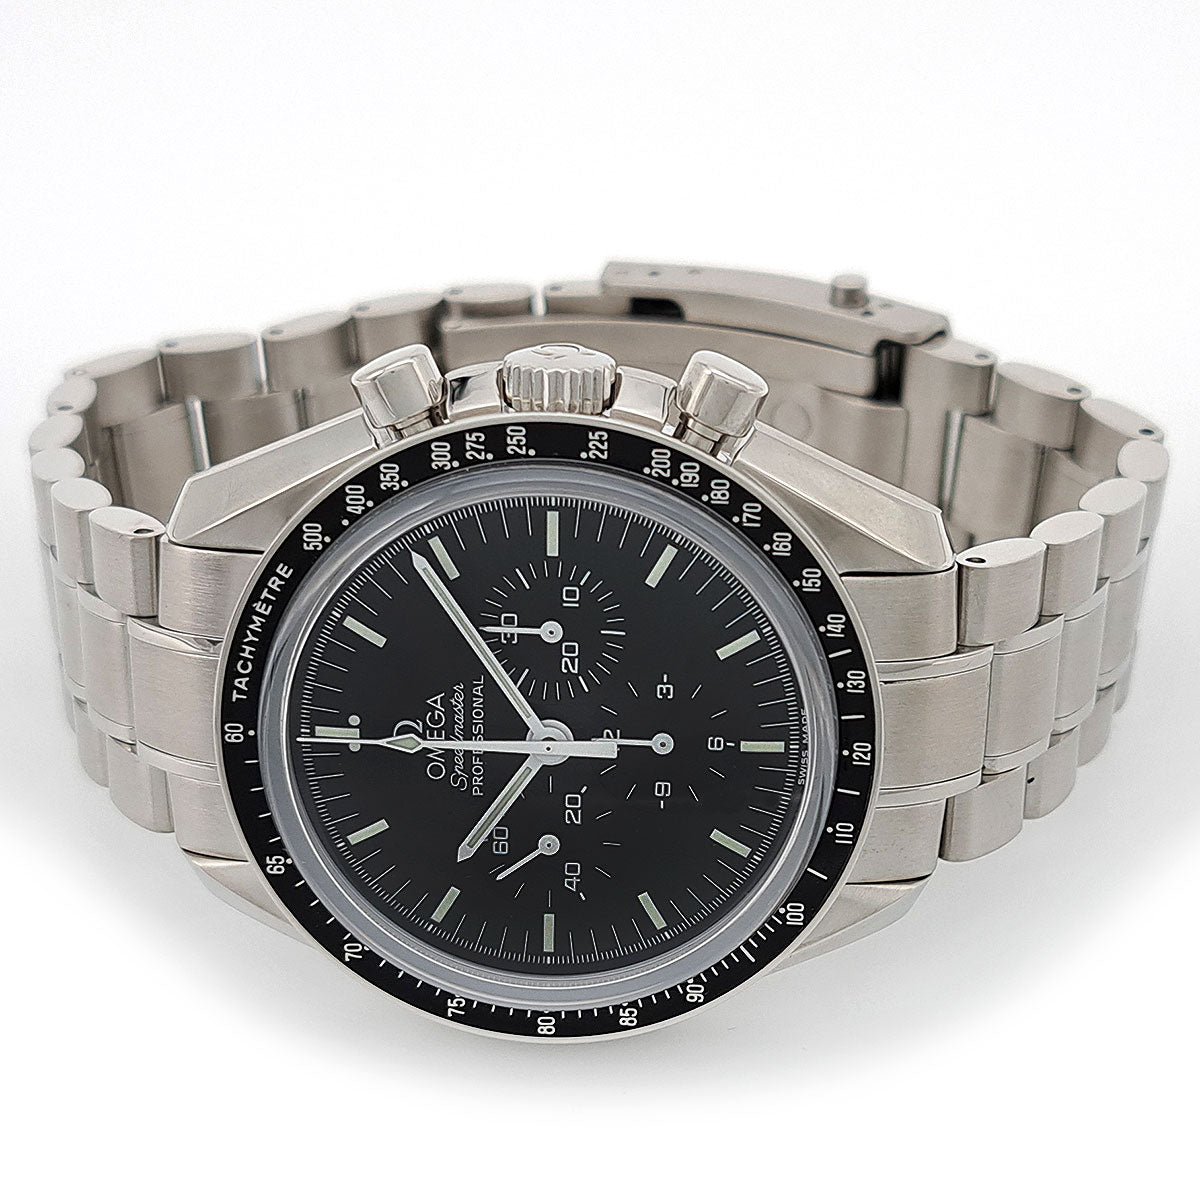 Omega Speedmaster Professional Chronograph Manual Winding Stainless Steel Men's Watch 3573.5